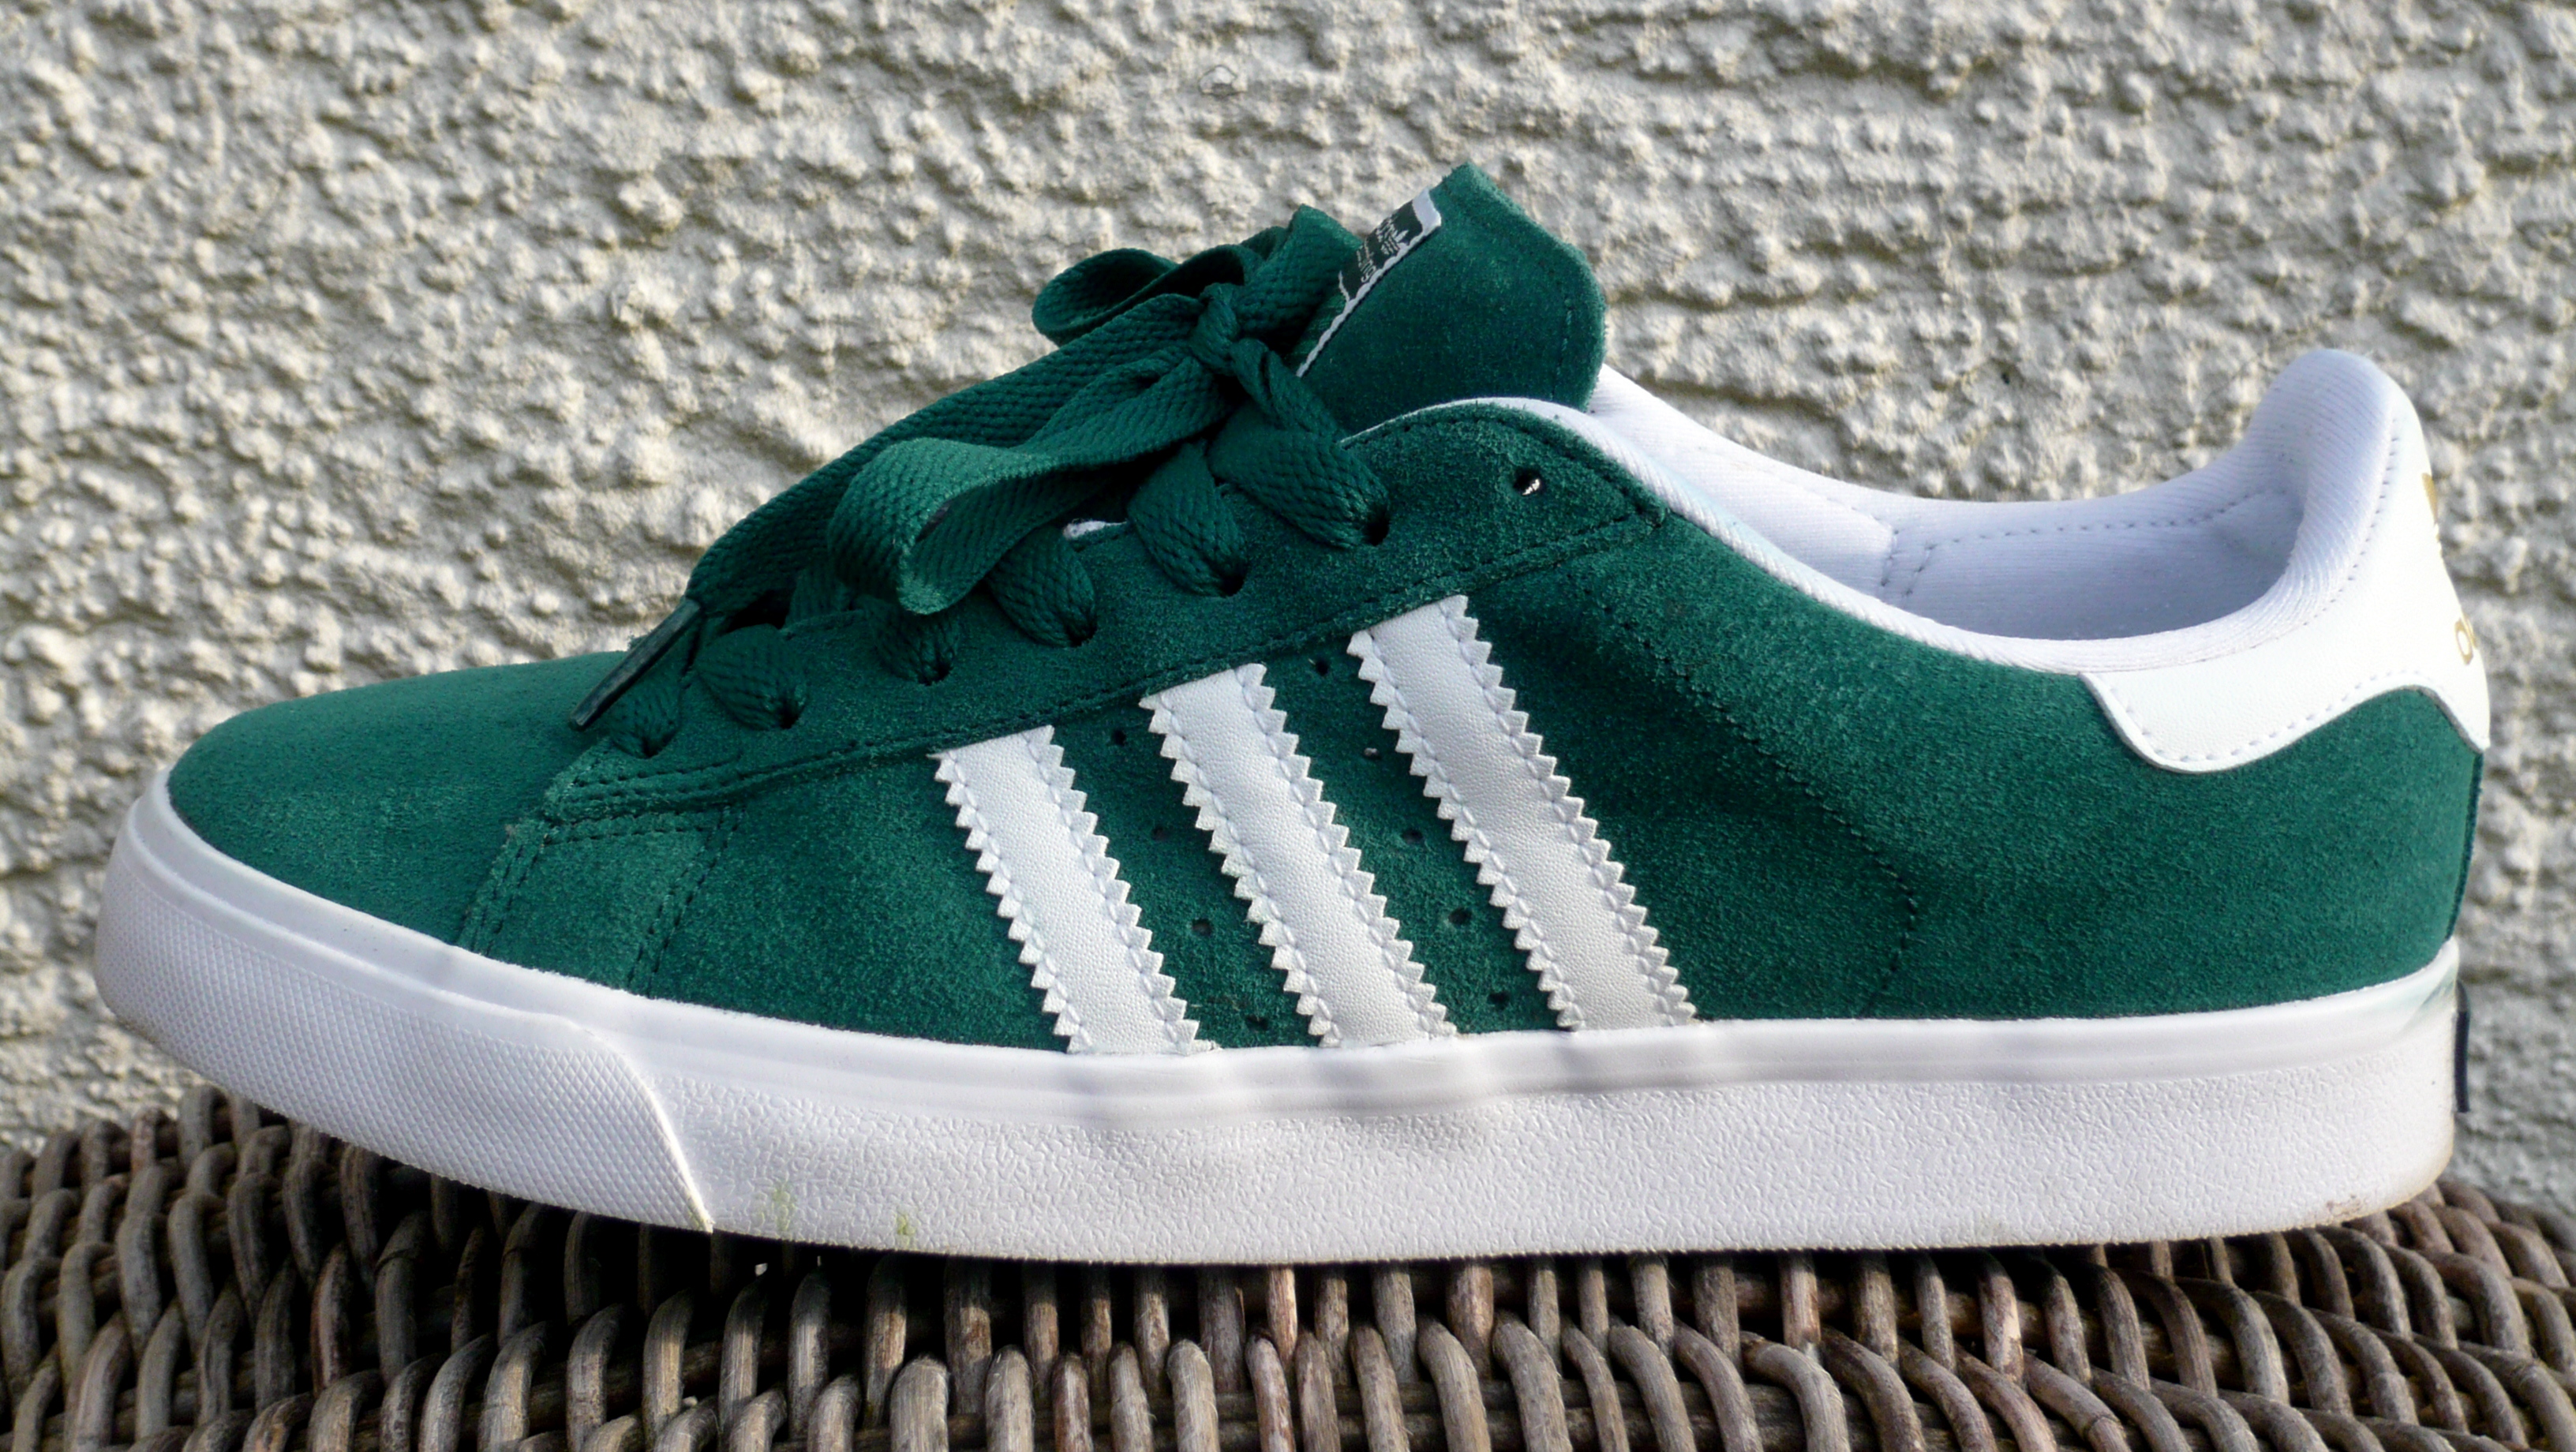 Adidas Campus vulc - Weartested 